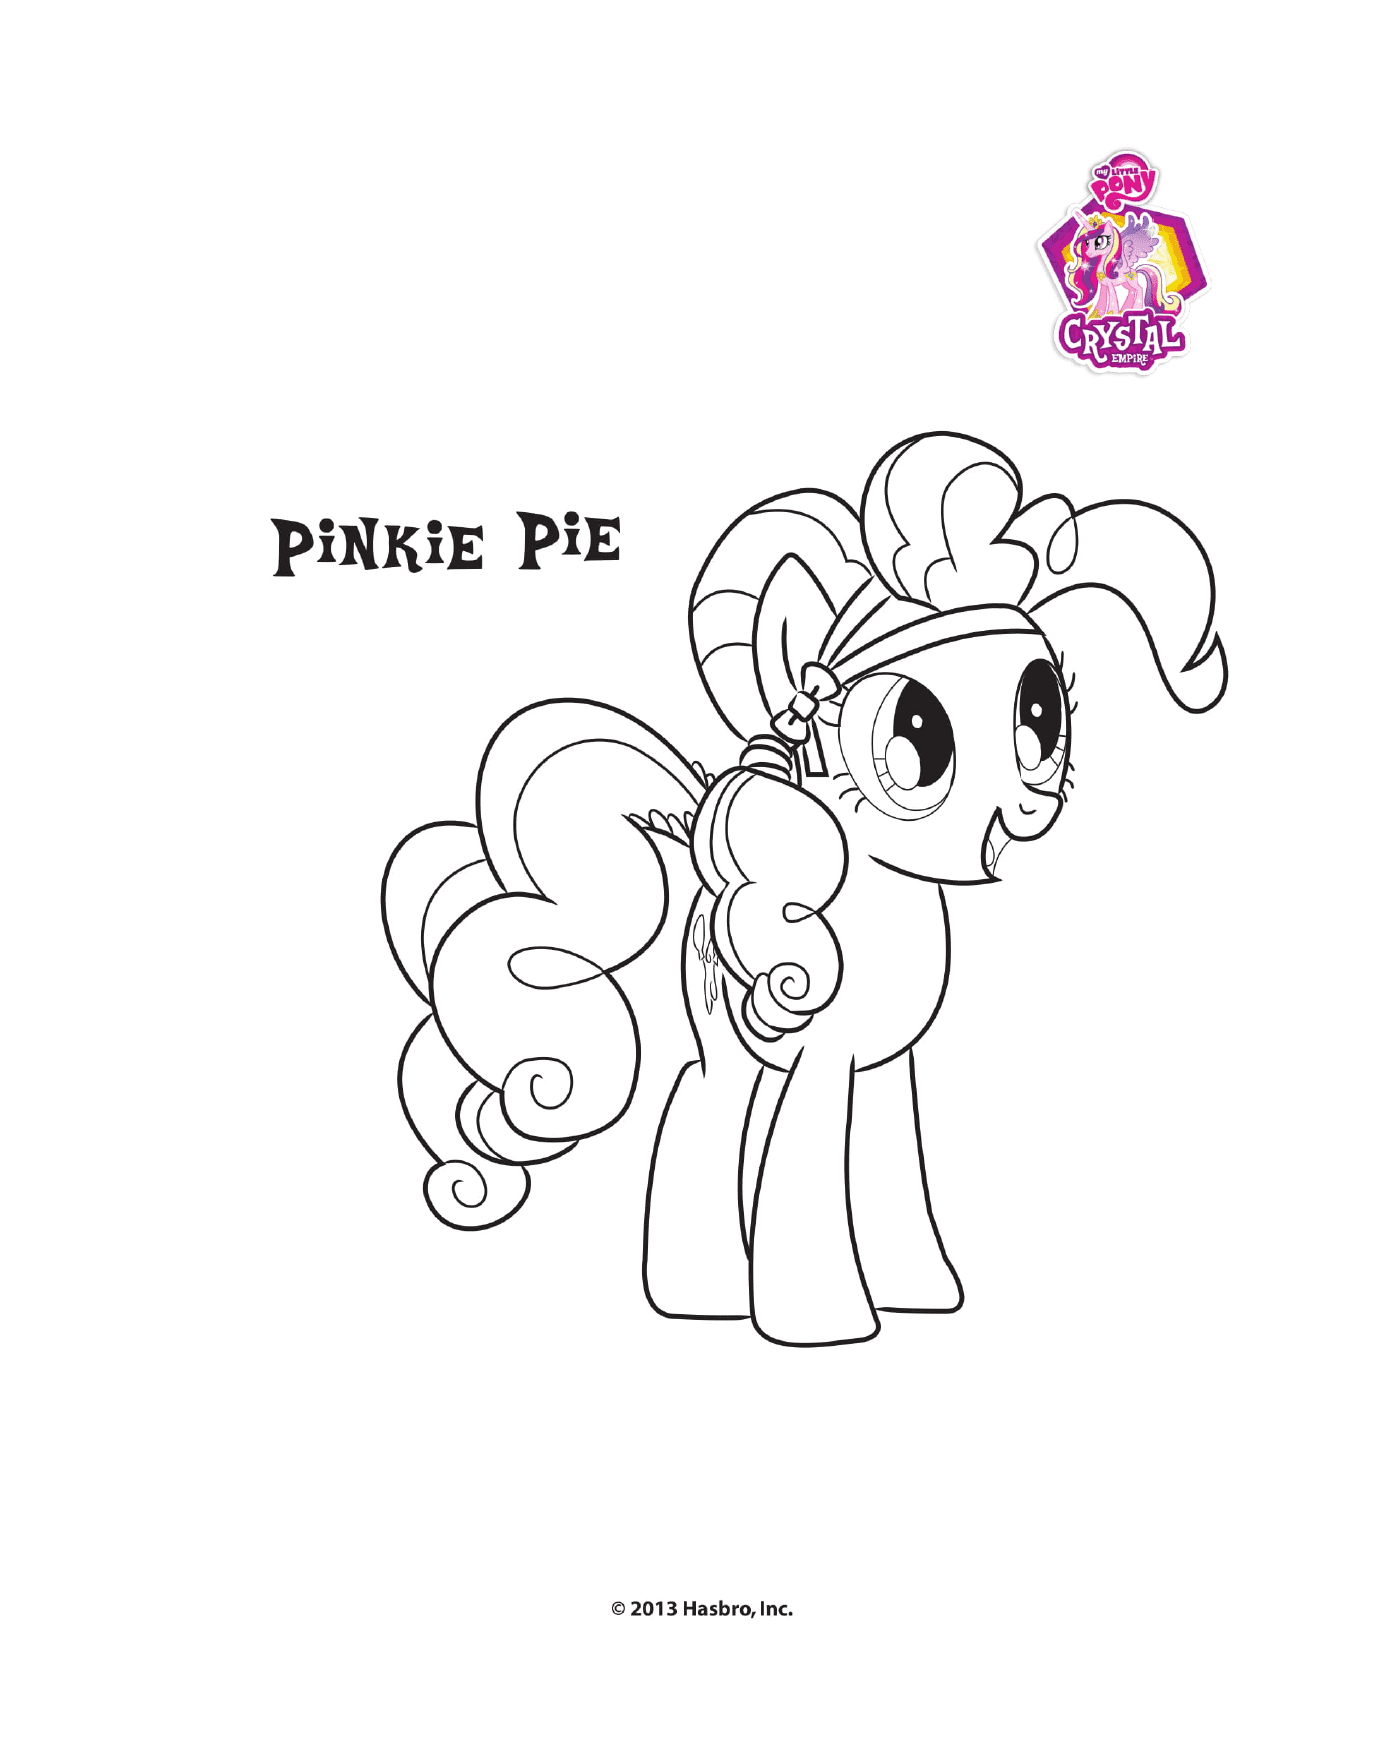  Pinkie Pie at Crystal Empire 